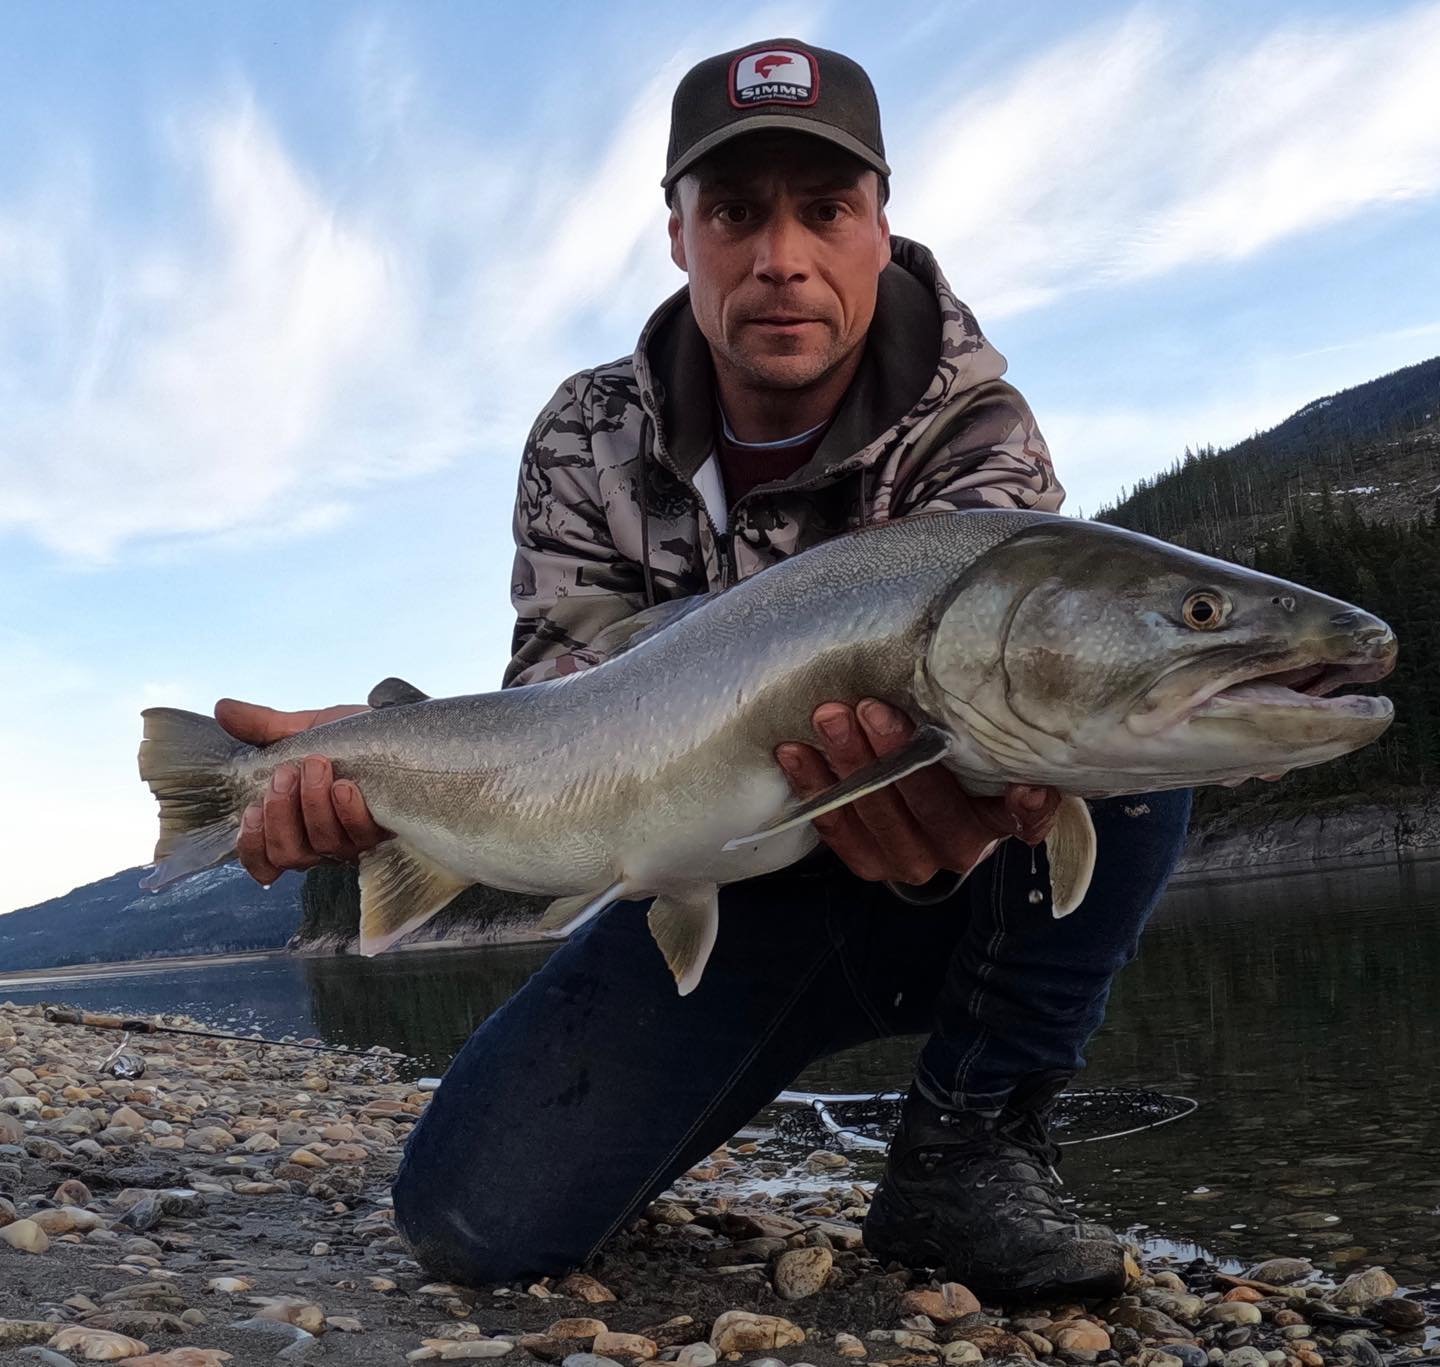 Big bull trout season has arrived. Boat access walk&amp;wade trips on the Columbia River available from now till the end of November. Get in touch link in bio. #riverfishing #columbiariver #columbiariverfishing #bulltrout #bulltroutcountry #flyfishin